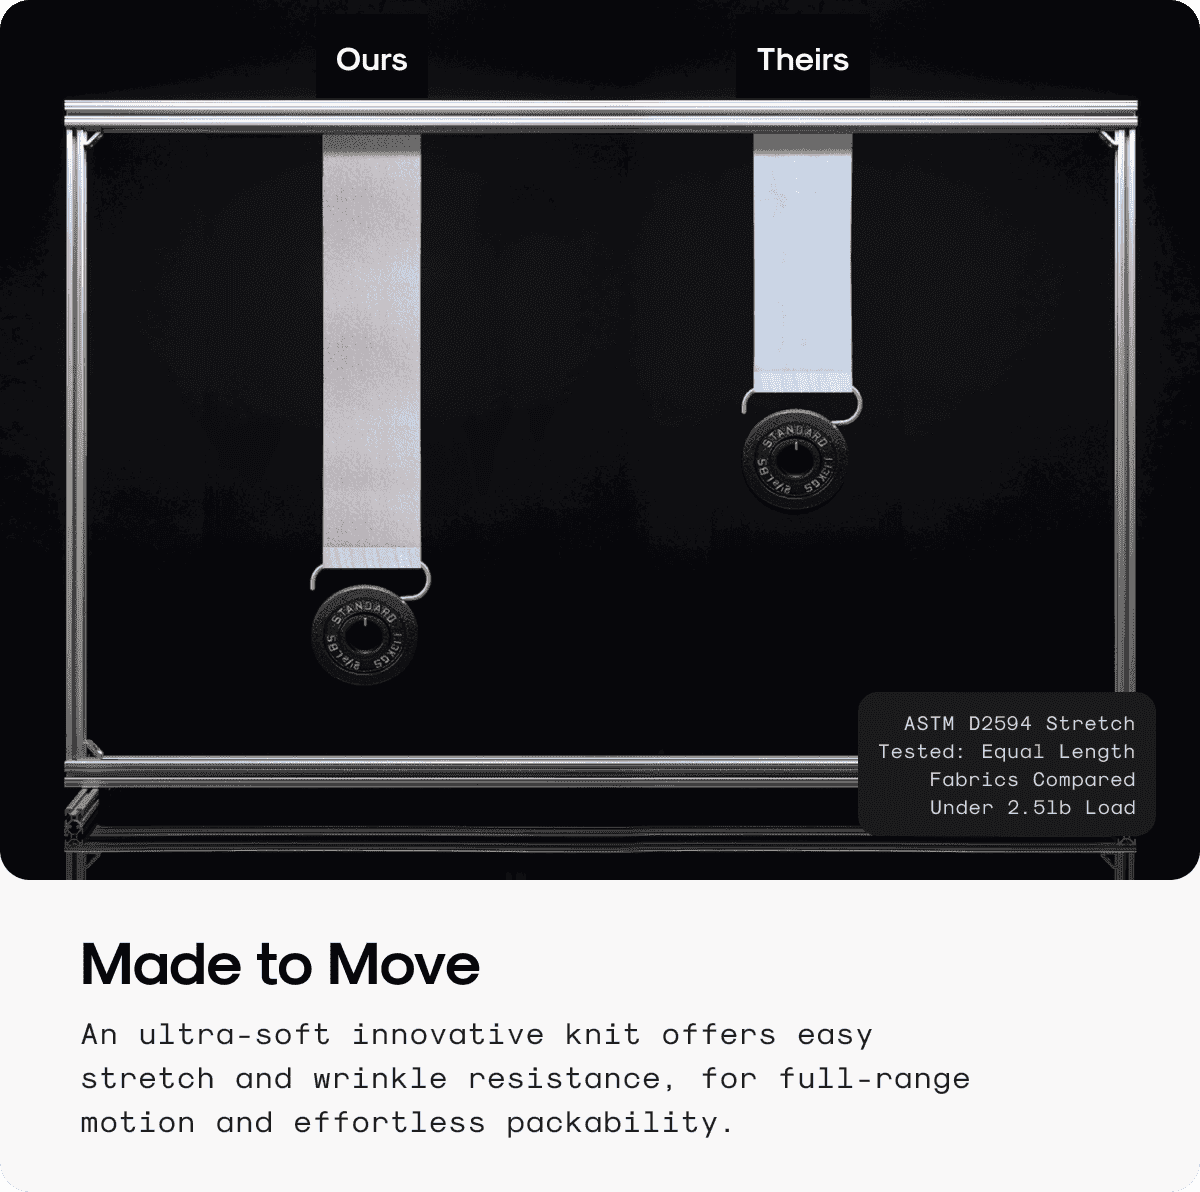 Made to Move